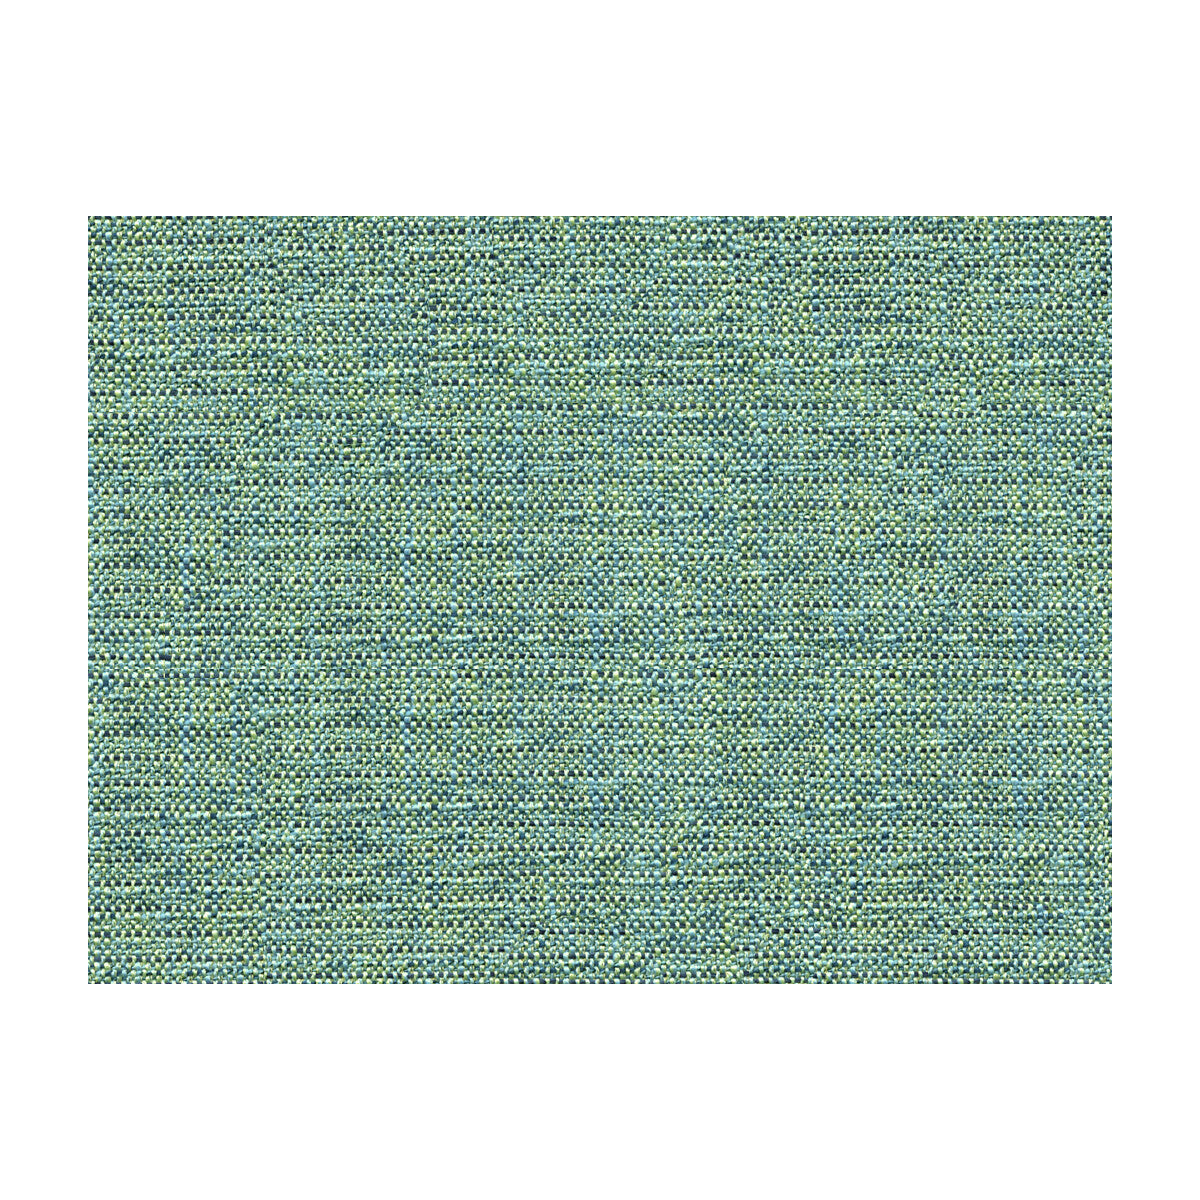 Rafael fabric in pool color - pattern 33788.515.0 - by Kravet Basics in the Jonathan Adler Charade collection